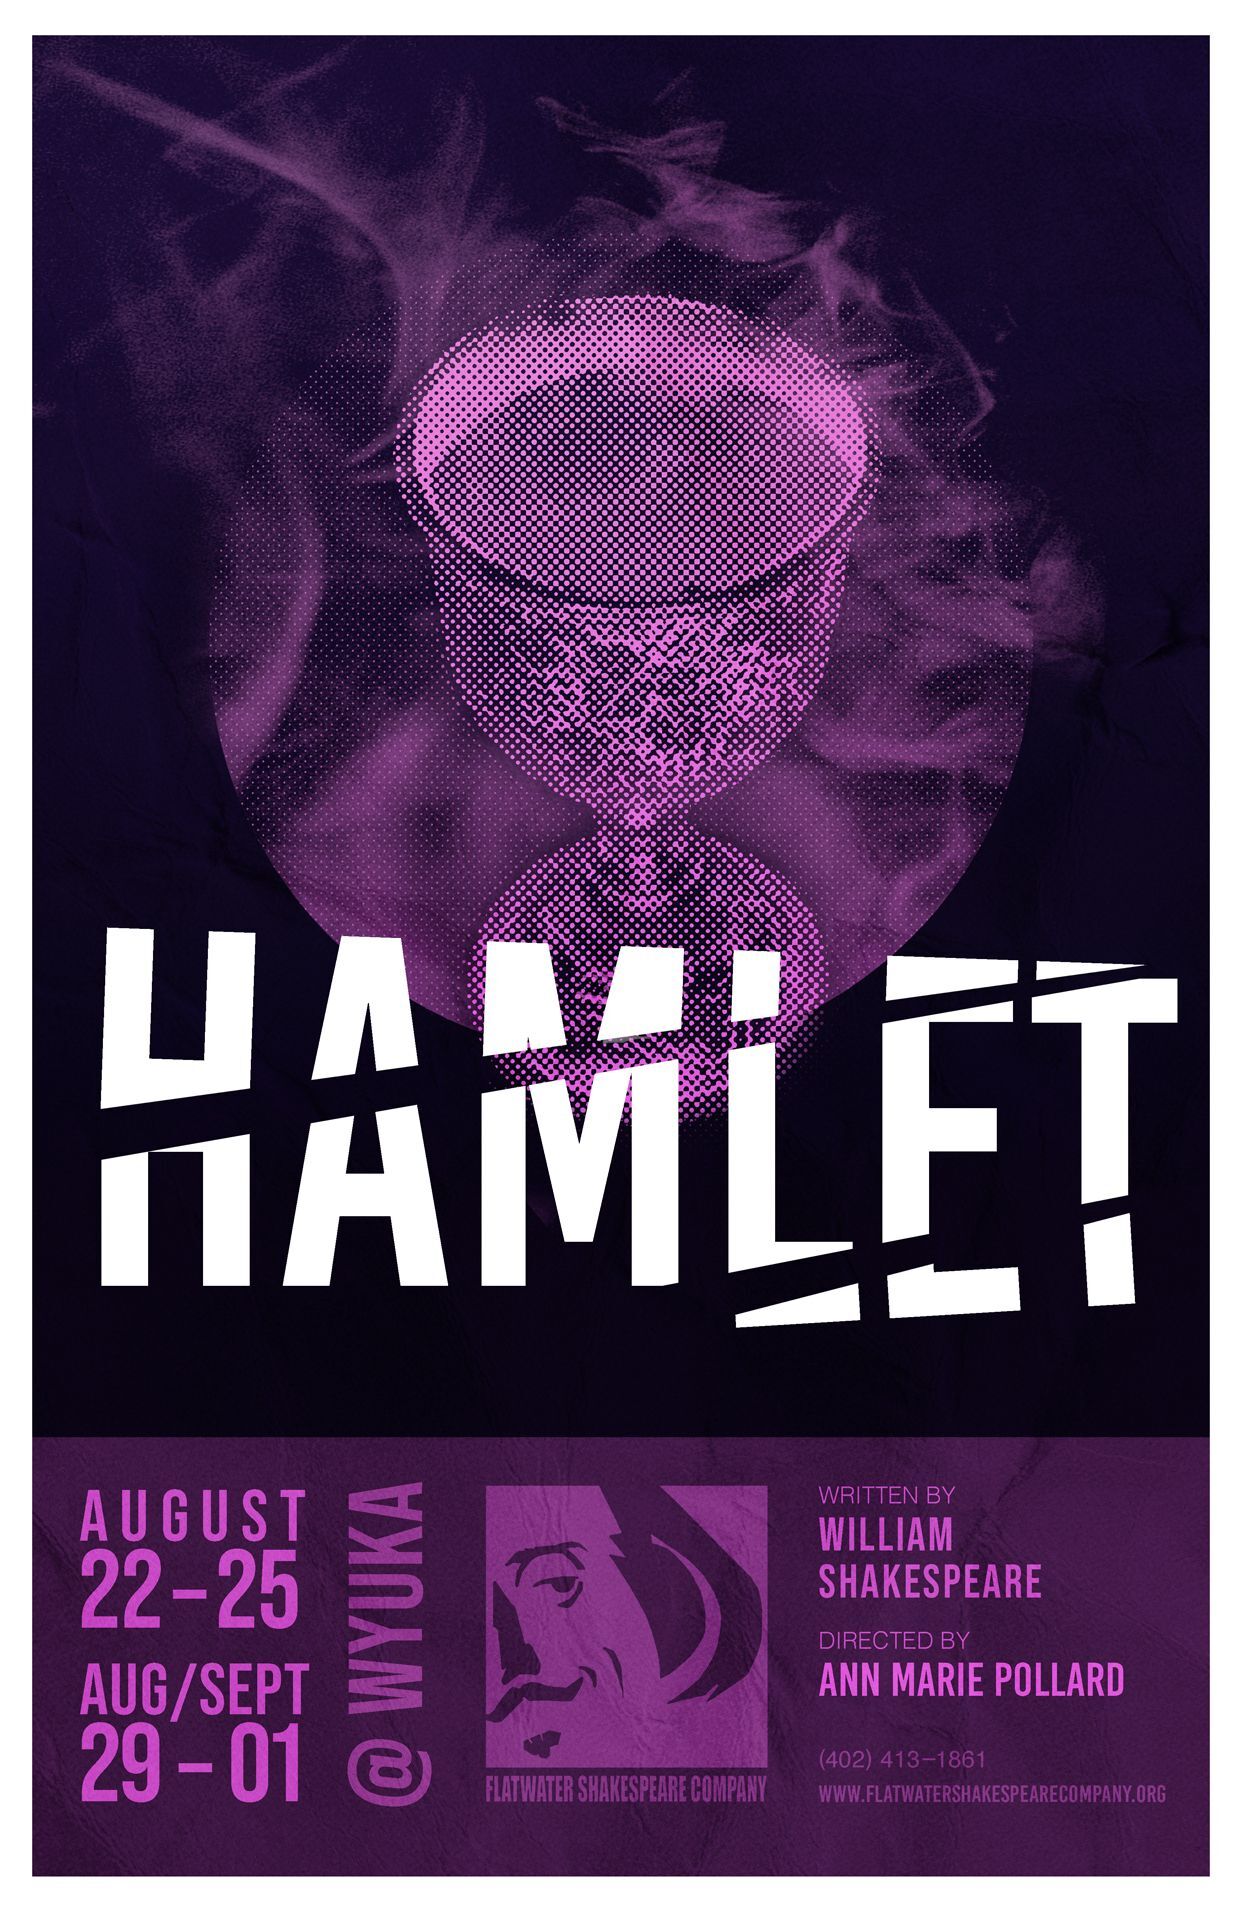 Learn More About Hamlet